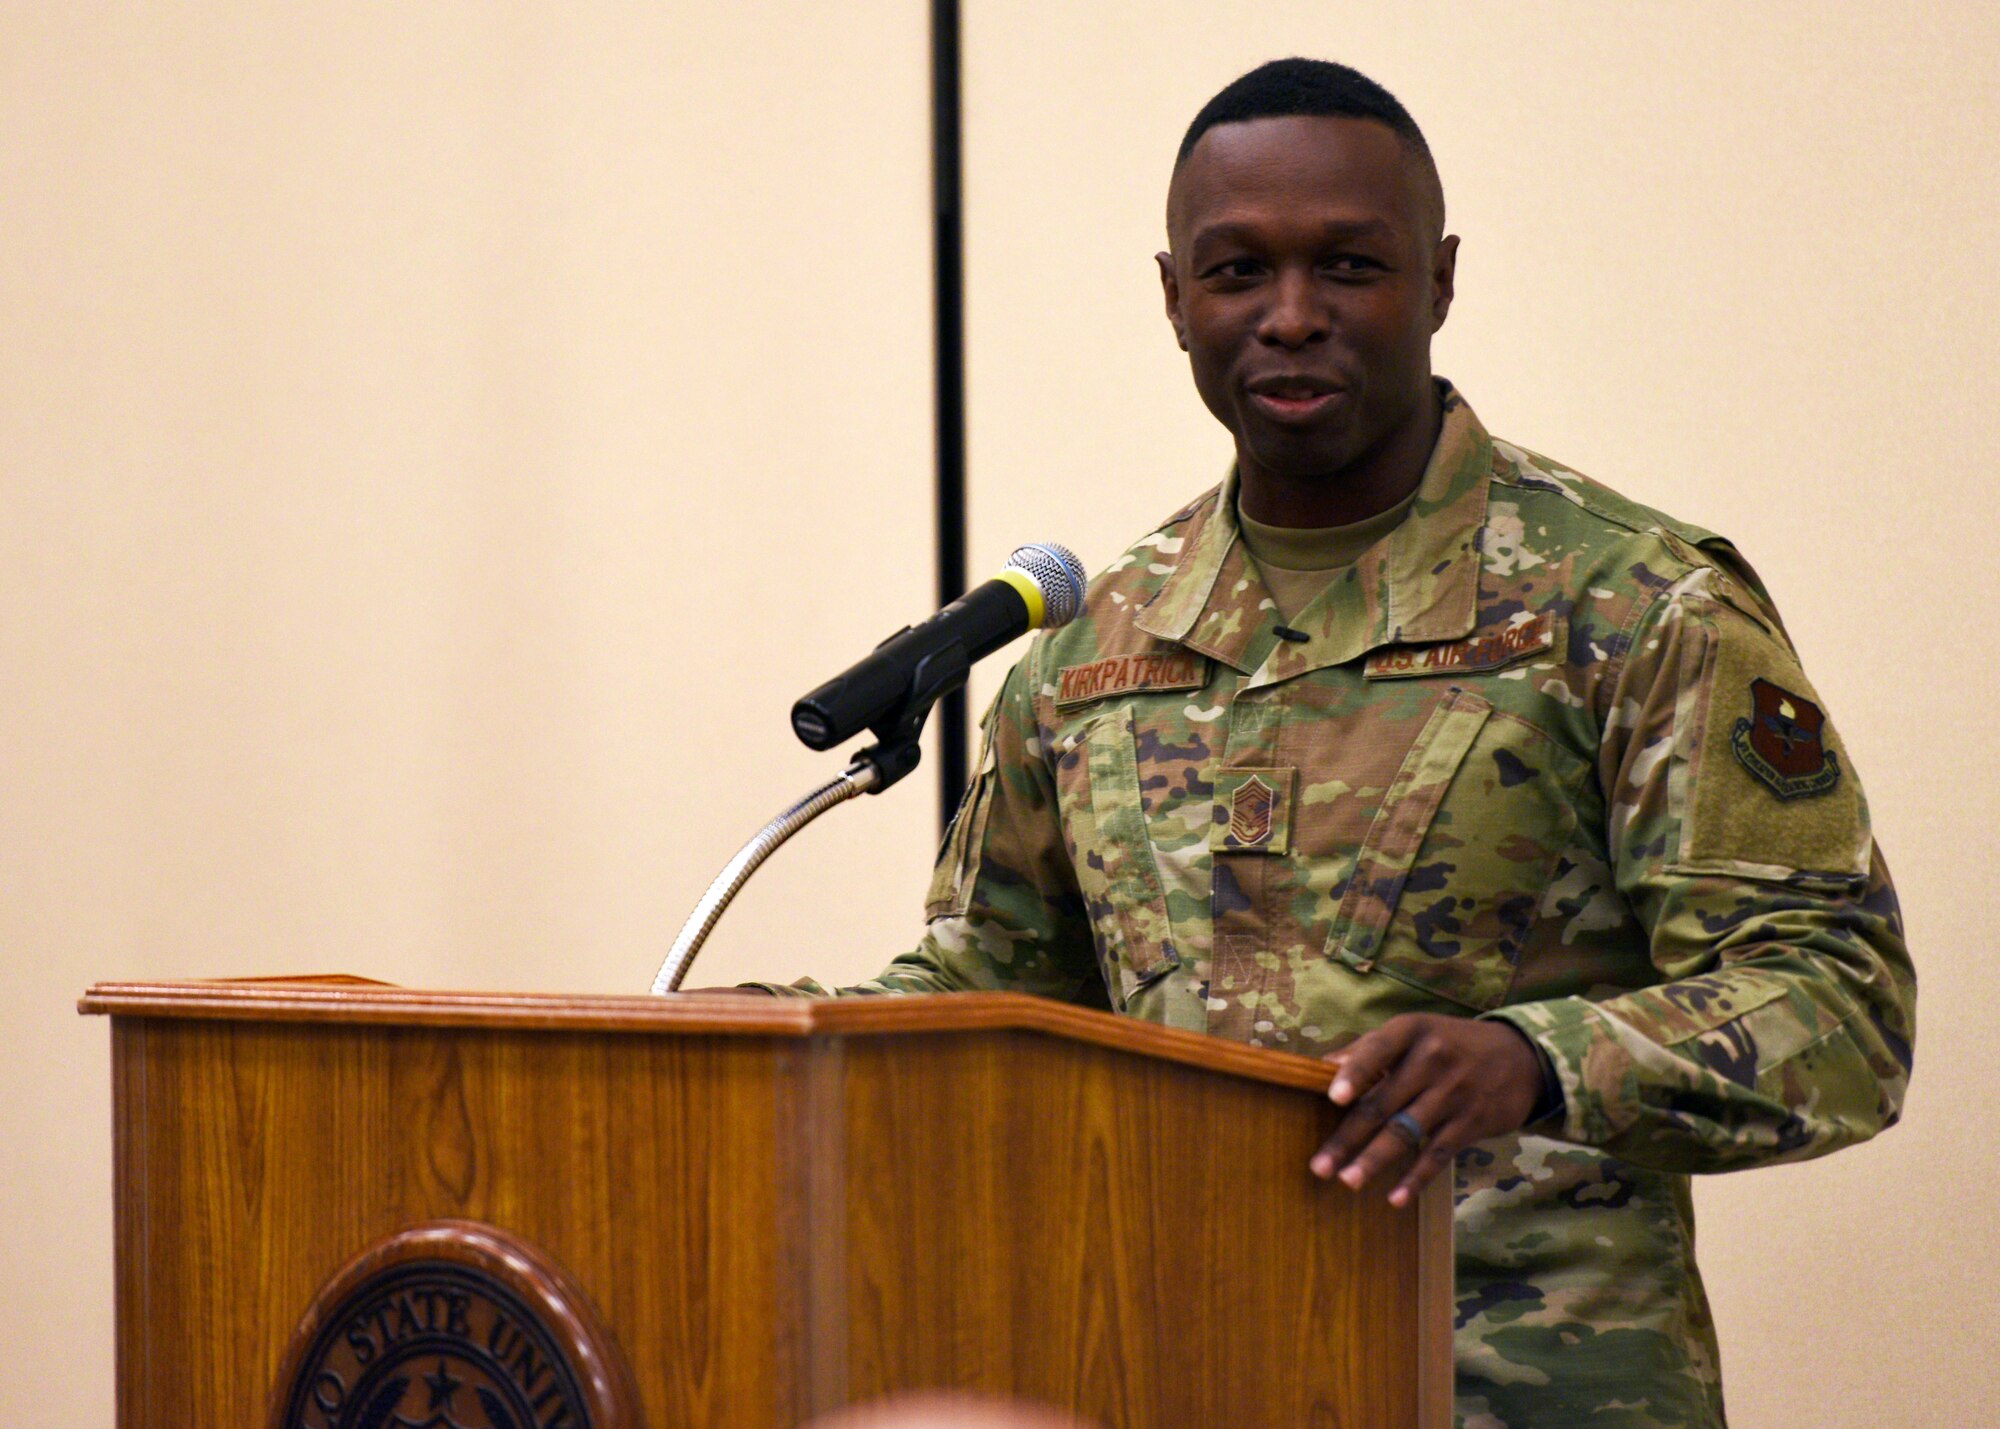 U.S. Air Force Chief Master Sgt. Lavor Kirkpatrick, 17th Training Wing command chief, speaks to honor veterans at Angelo State University in San Angelo, Texas, Nov. 11, 2019. Kirkpatrick spoke on the importance of honoring those who made the decision to serve in the military and thanked the veterans present for their service to our country. (U.S. Air Force photo by Airman 1st Class Robyn Hunsinger/Released)